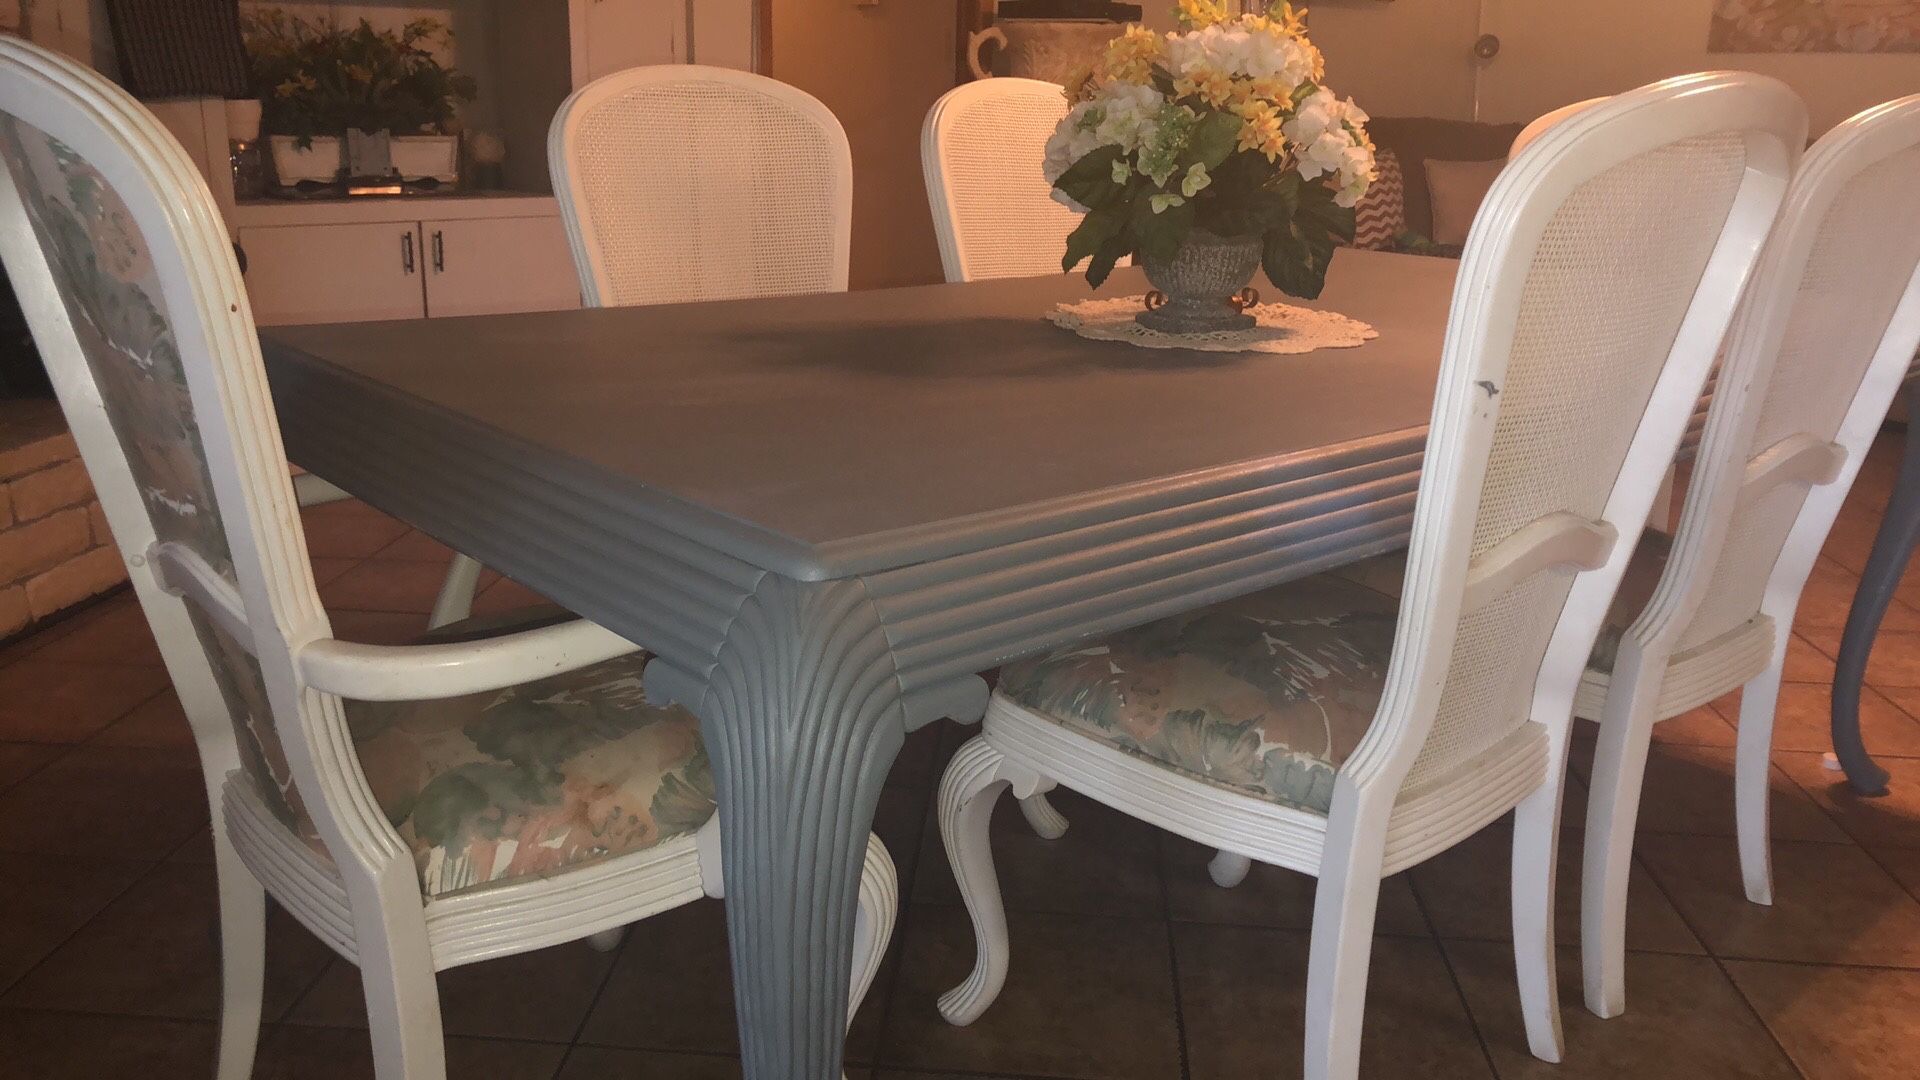 Dining table with 6 chairs & hutch